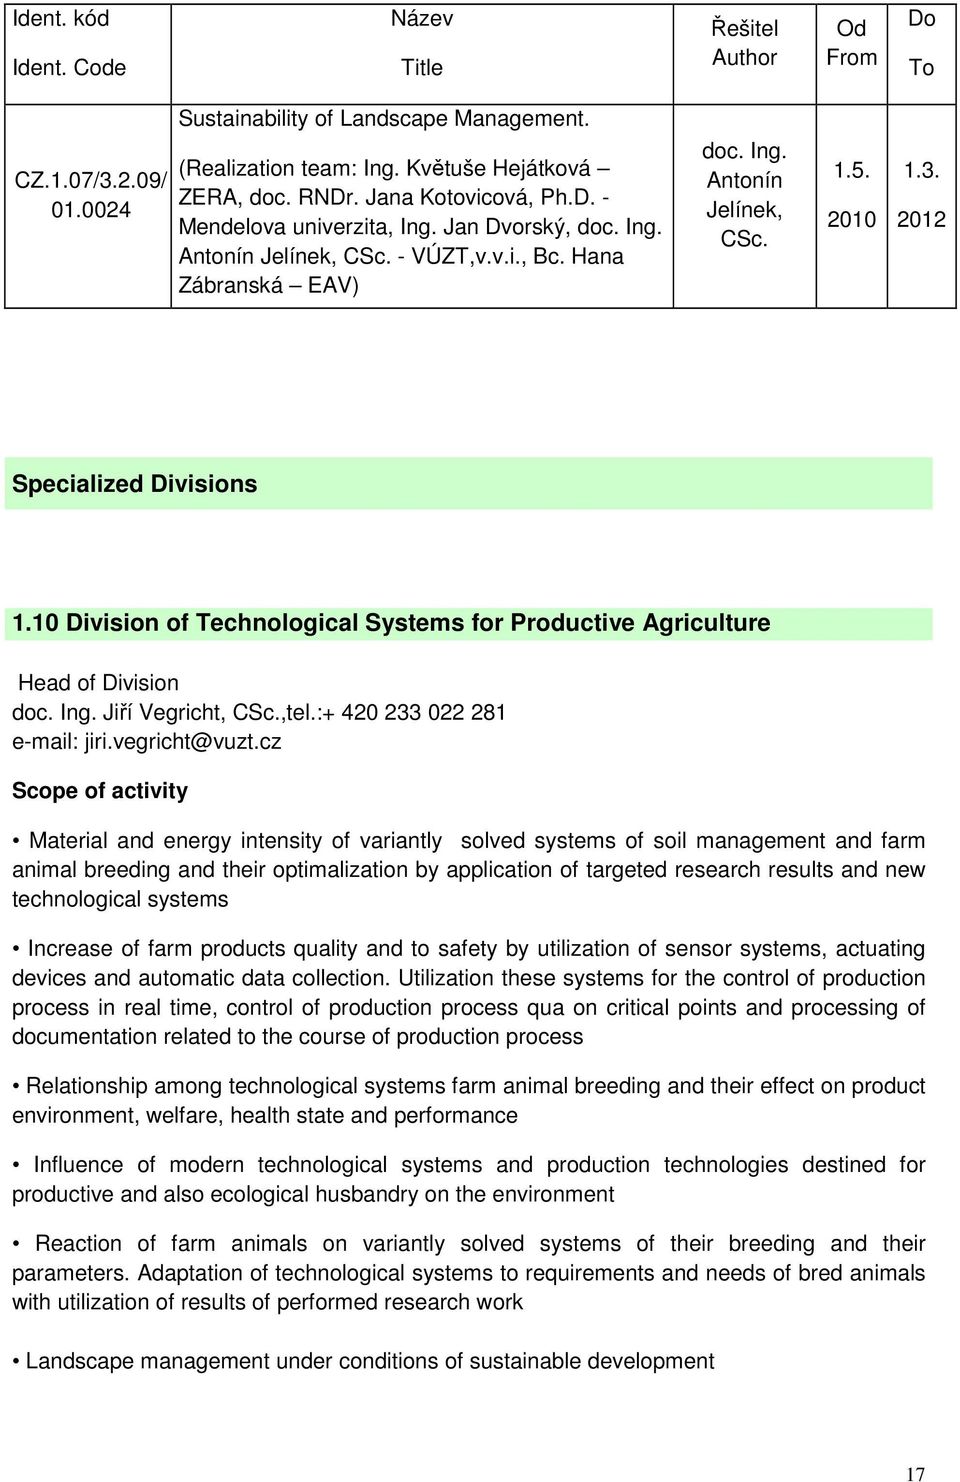 2012 Specialized Divisions 1.10 Division of Technological Systems for Productive Agriculture Head of Division doc. Ing. Jiří Vegricht, CSc.,tel.:+ 420 233 022 281 e-mail: jiri.vegricht@vuzt.